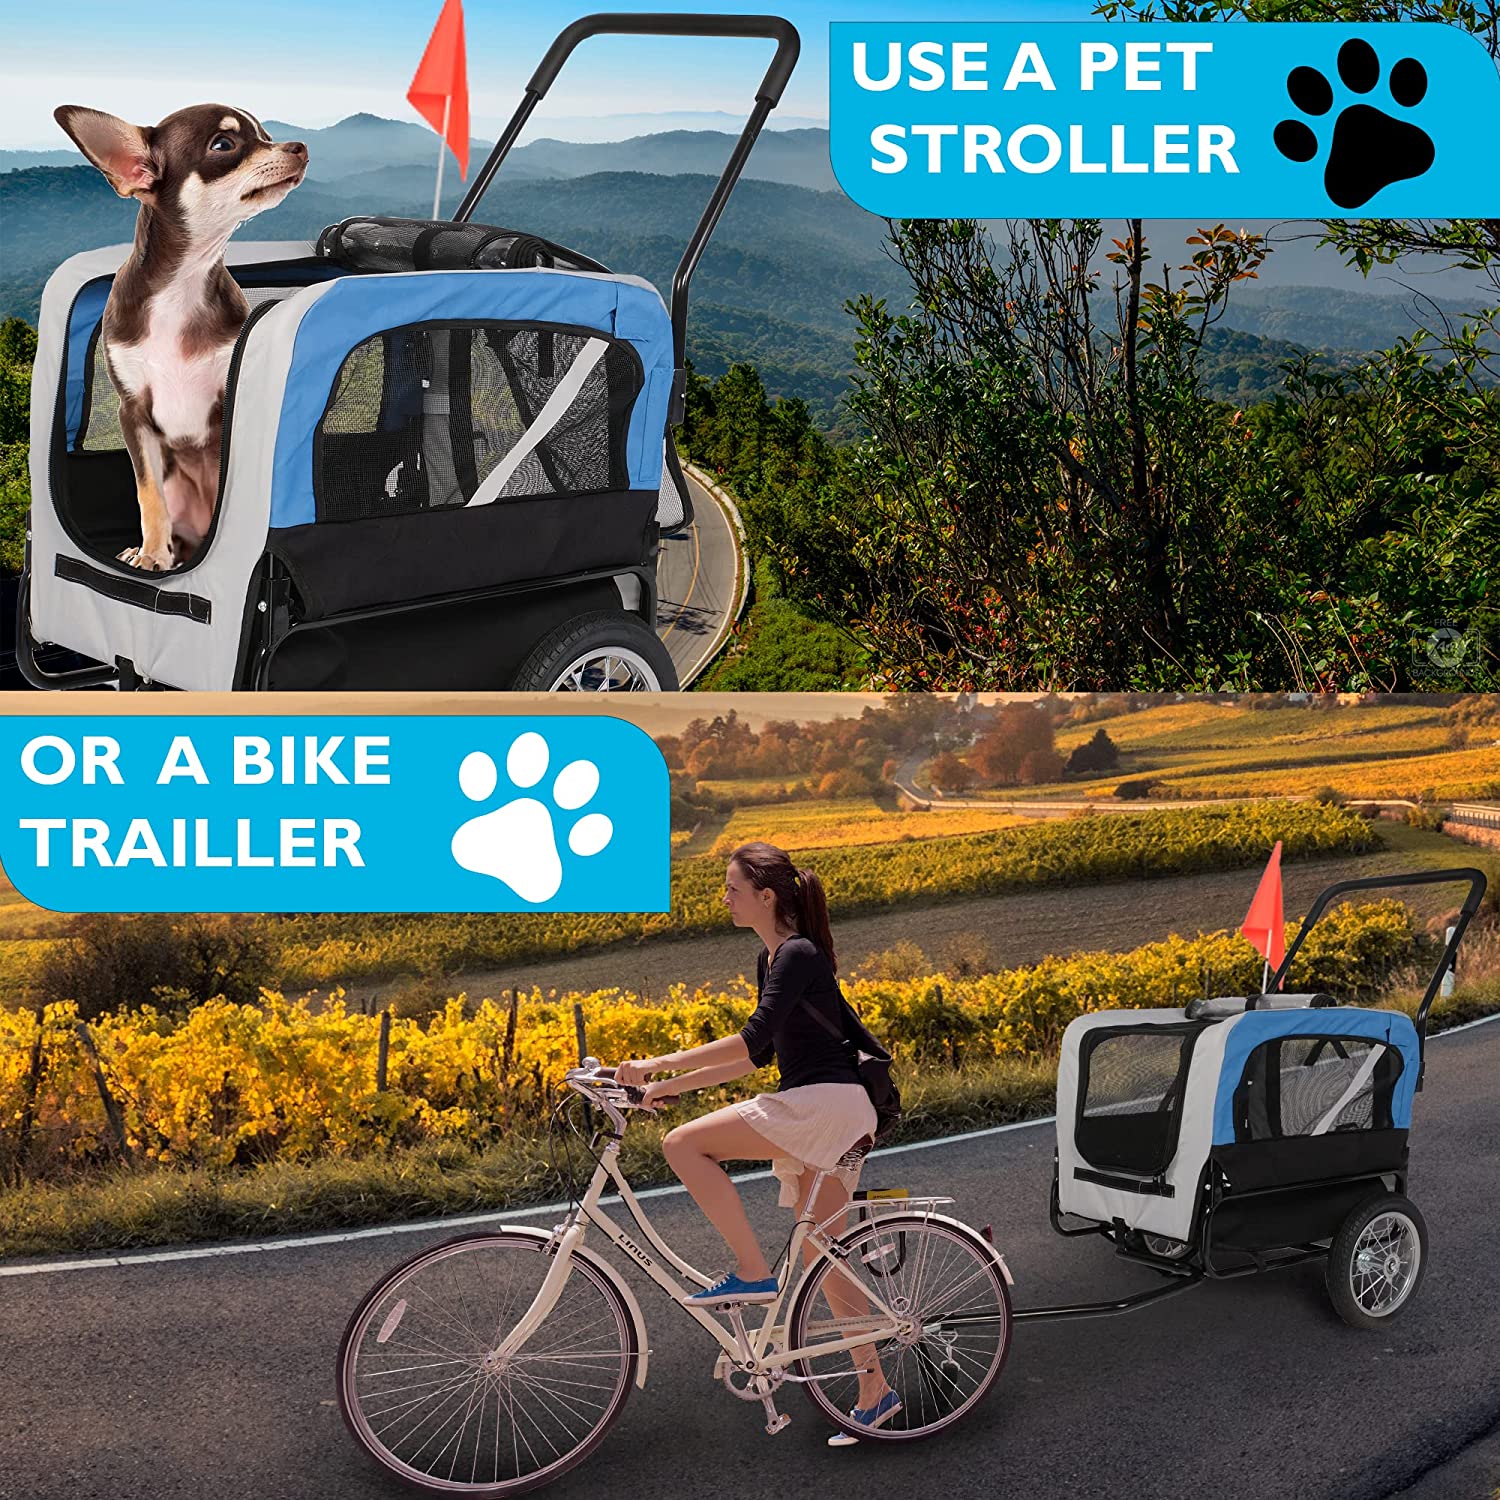 Dog Bike Trailer Cart 2 in 1 Pet Bicycle Stroller for Travel with Reflectors Parking Brake Breathable Protective Net, Blue